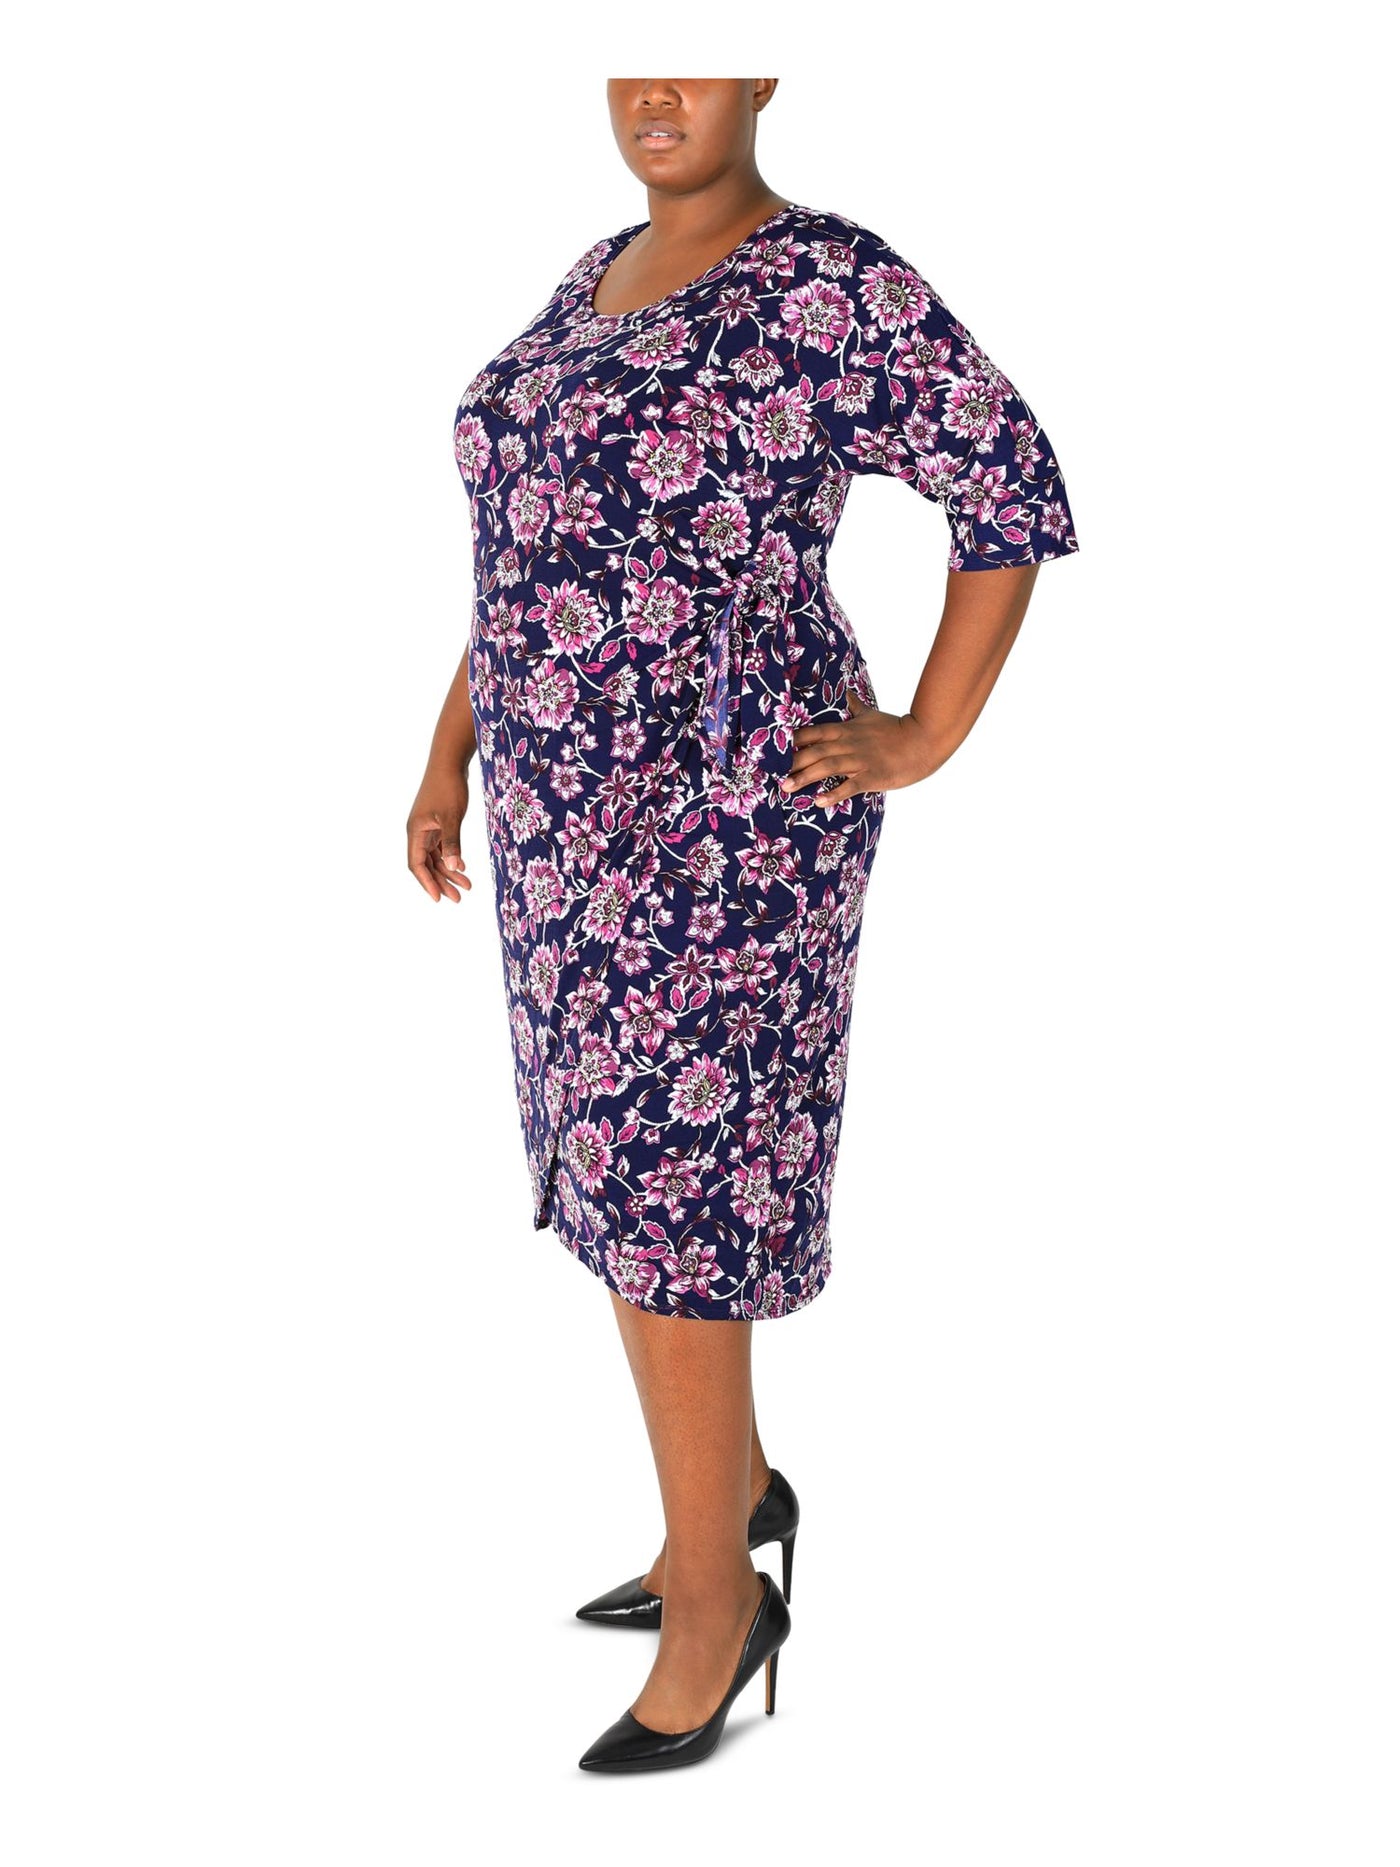 SIGNATURE BY ROBBIE BEE Womens Navy Textured Crossover Skirt Tie Side Floral 3/4 Sleeve Scoop Neck Below The Knee Wear To Work Sheath Dress Plus 3X